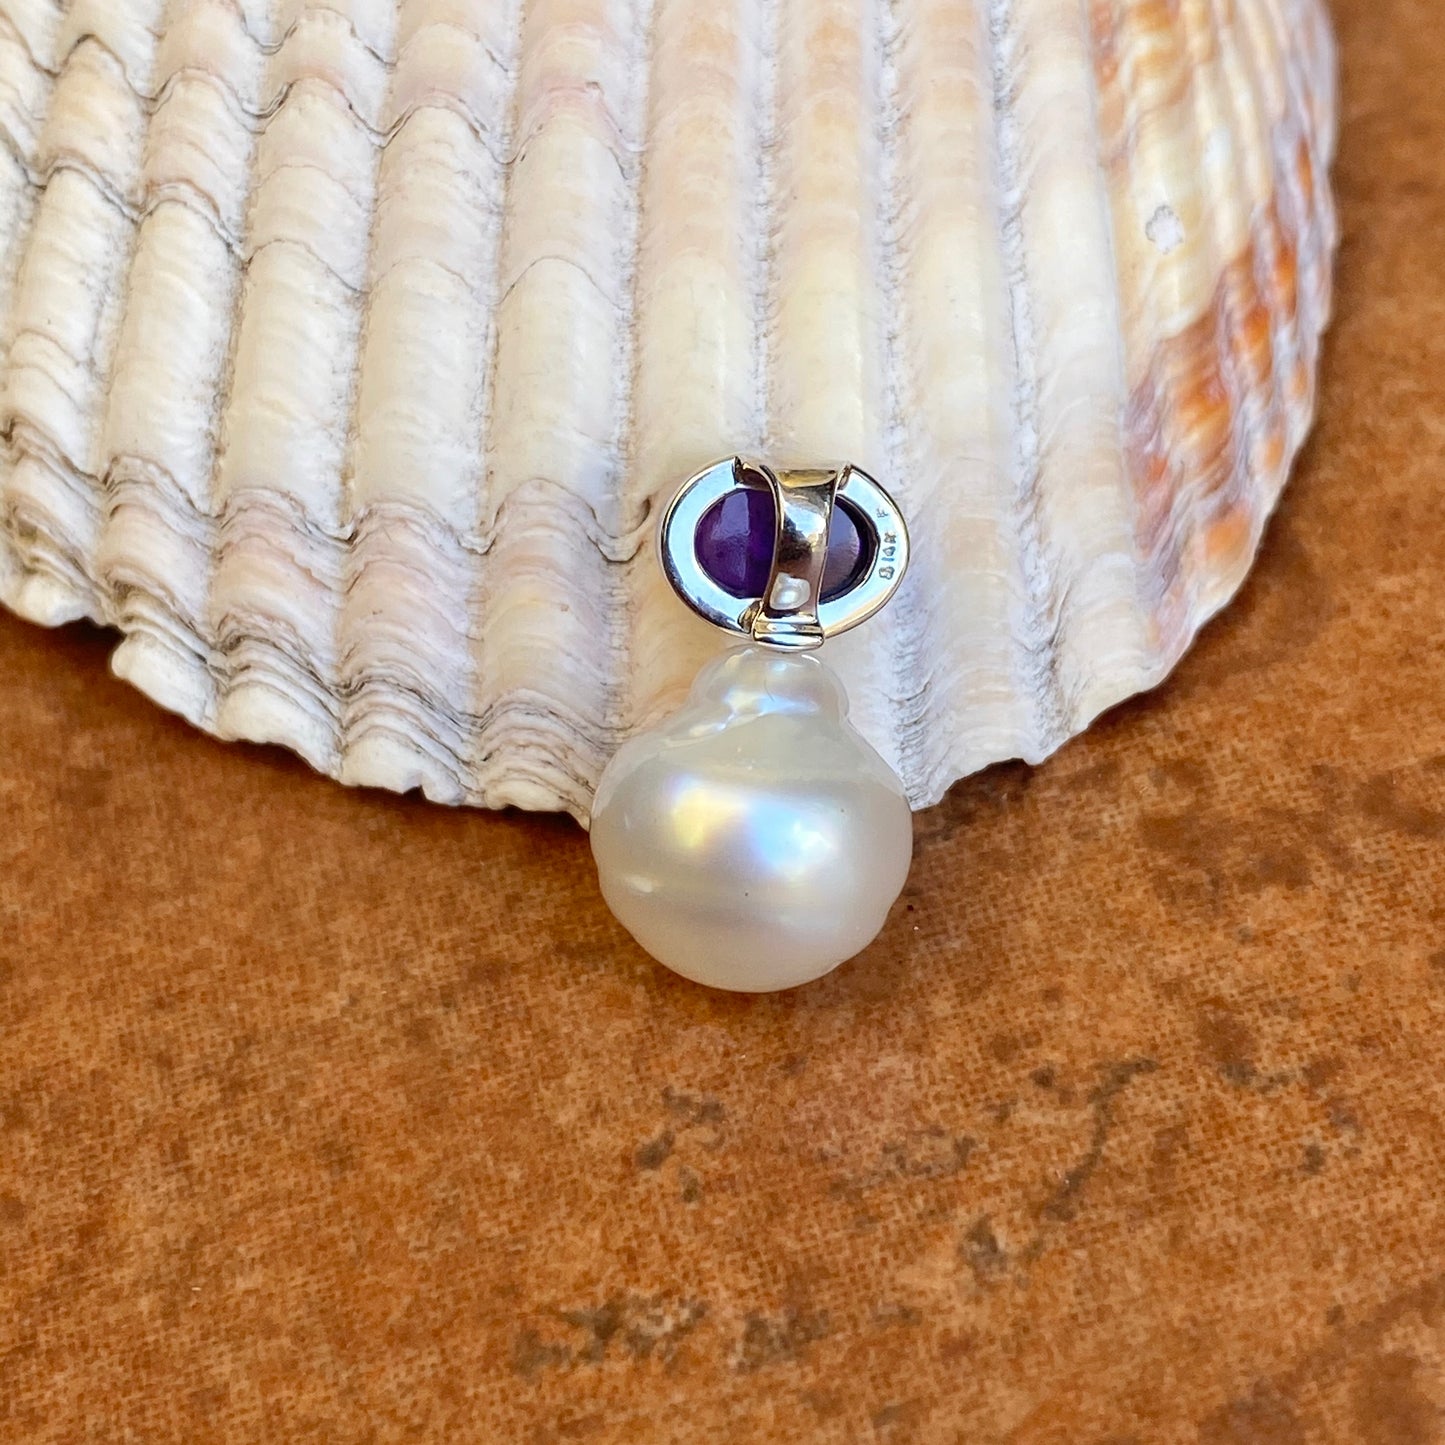 14KT White Gold Cabochon Amethyst + 11mm Paspaley South Sea Pearl Pendant Slide #2